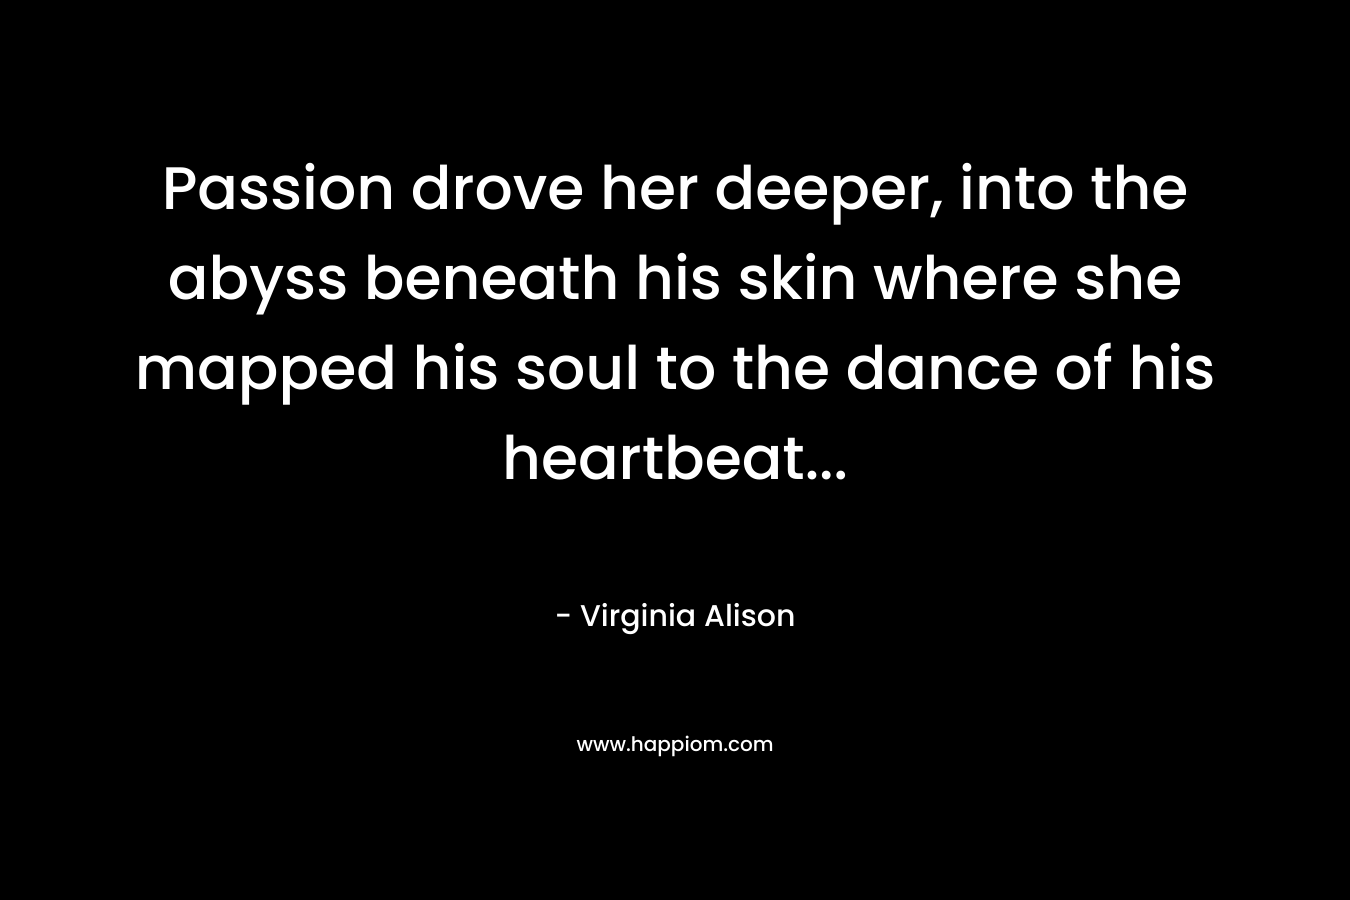 Passion drove her deeper, into the abyss beneath his skin where she mapped his soul to the dance of his heartbeat...